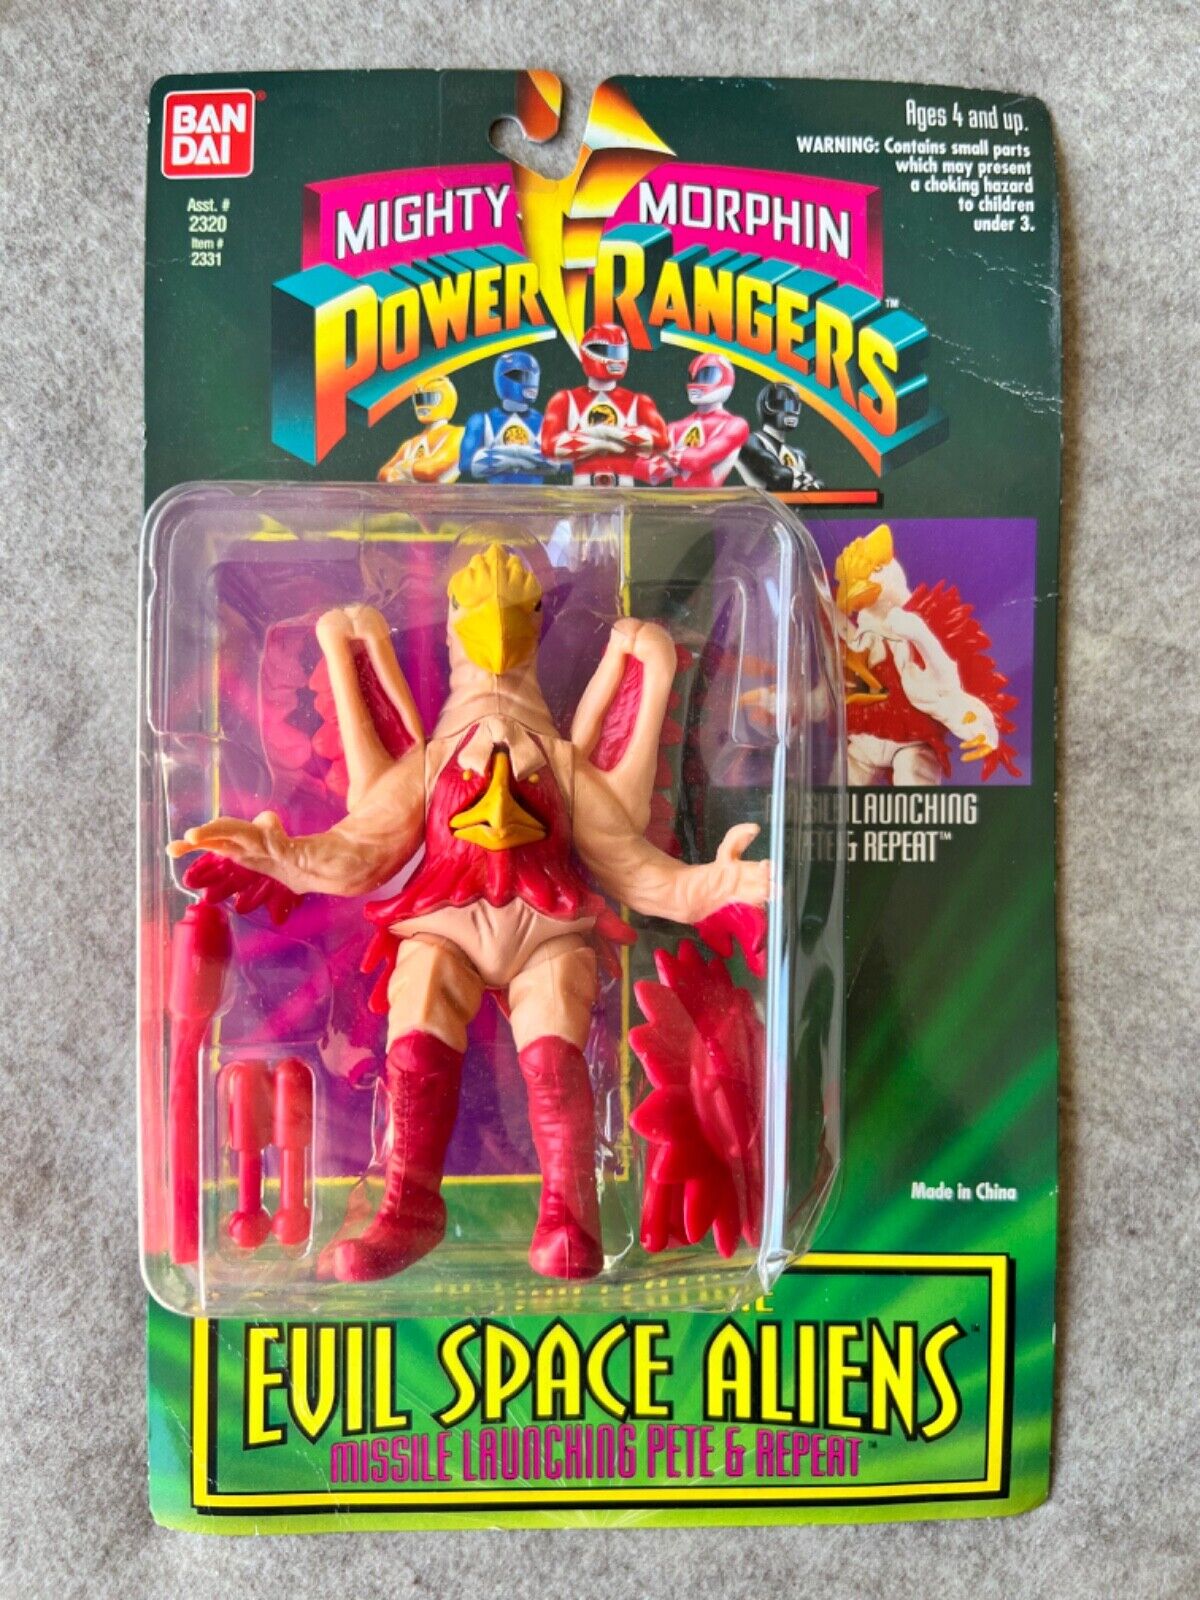 Mighty Morphin Power Rangers Evil Space Aliens Missile Launching Pete & Repeat